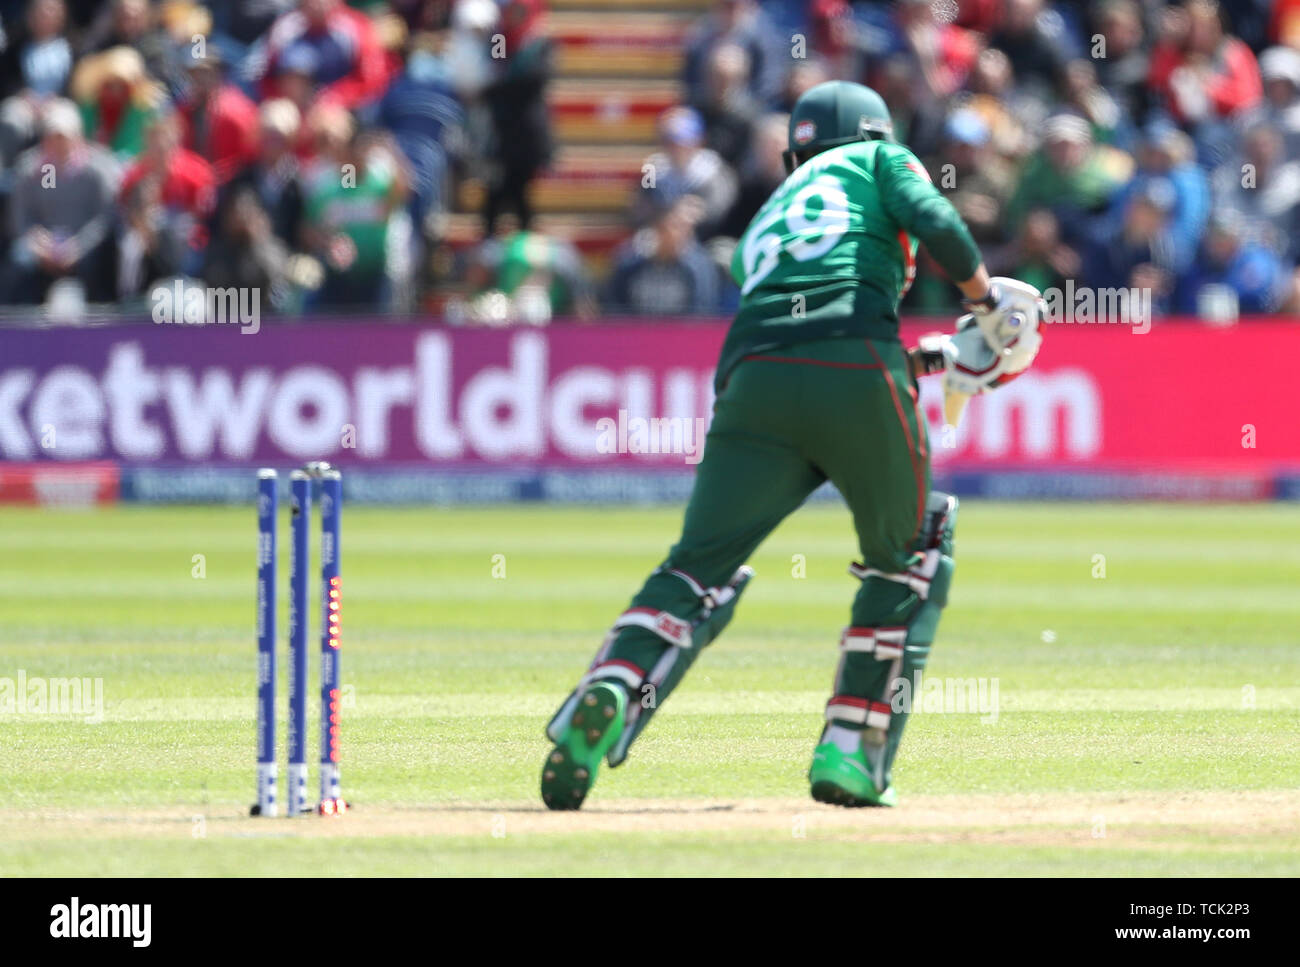 Bangladesh's Soumya Sarkar is bowled out by England's ofra Archer during the ICC Cricket World Cup group stage match at the Cardiff Wales Stadium. Stock Photo